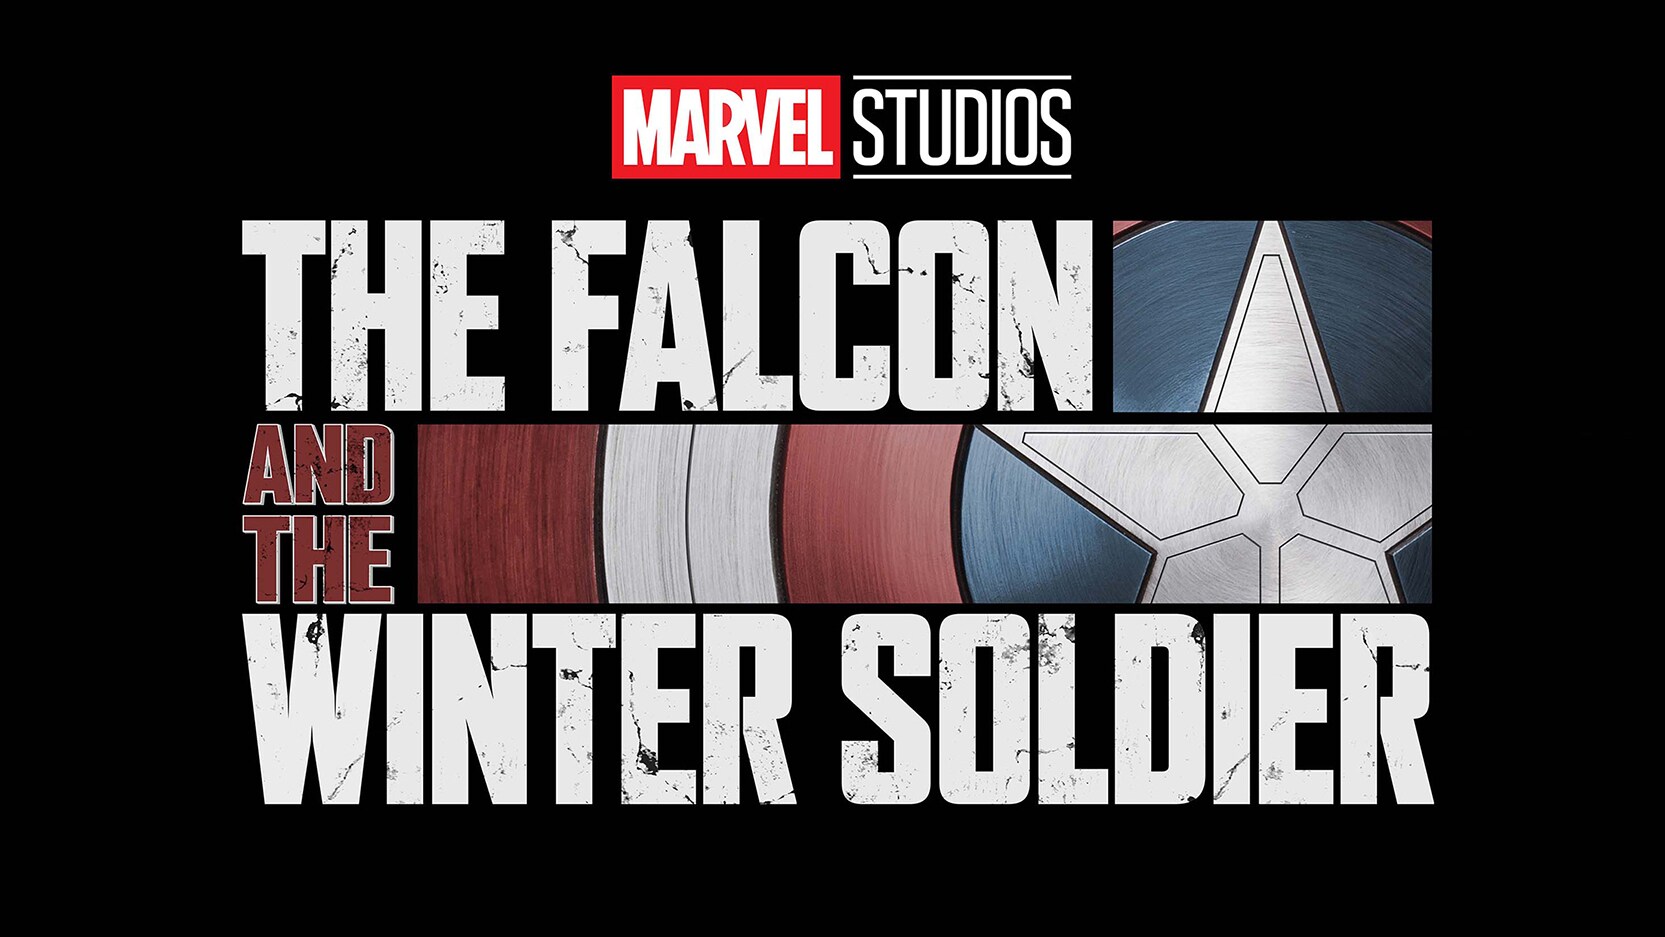 THE FALCON AND THE WINTER SOLDIER OPENS AS MOST WATCHED SERIES PREMIERE EVER ON DISNEY+